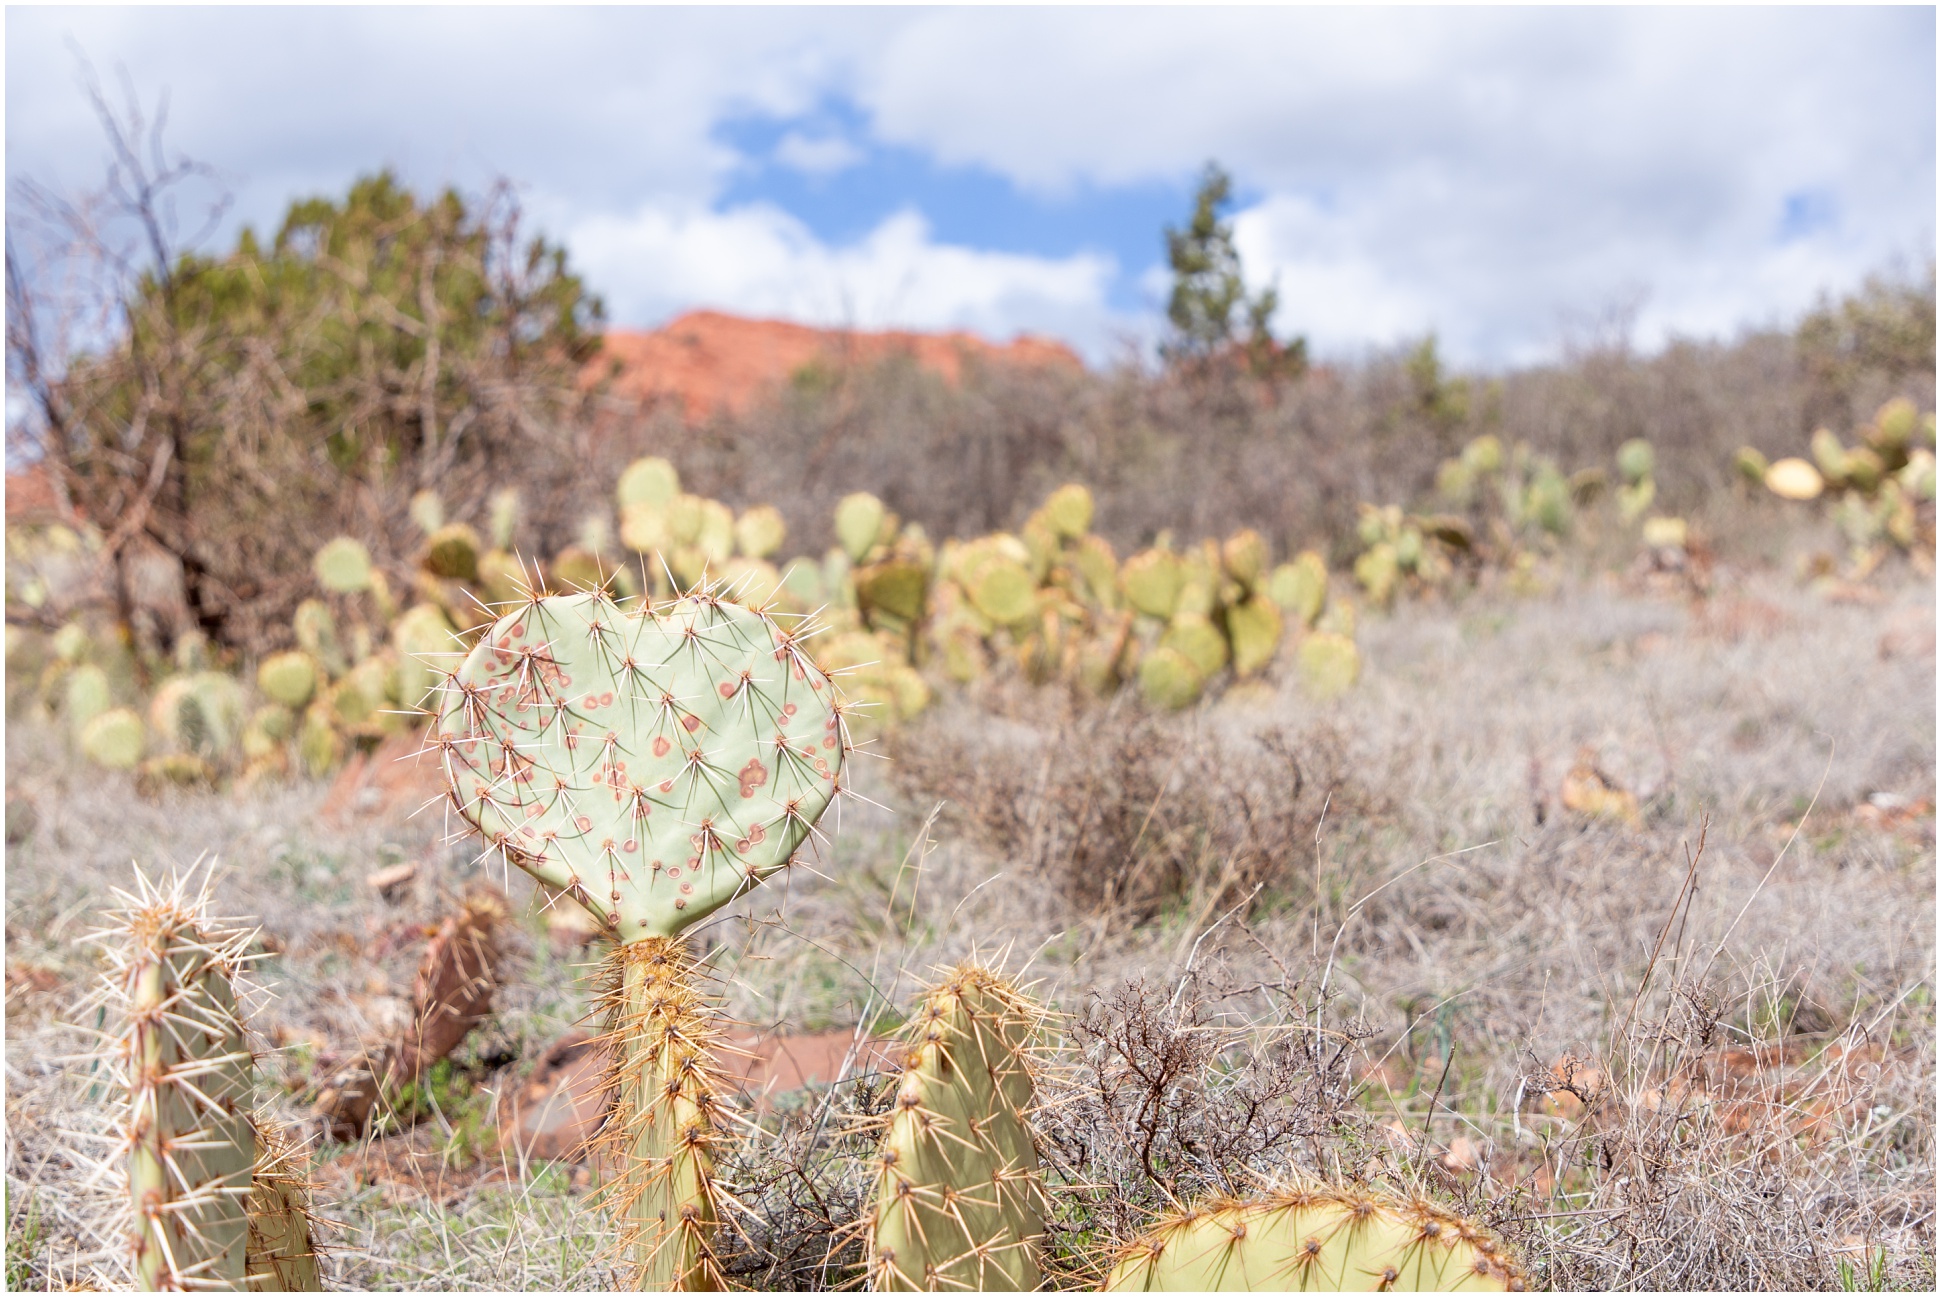 Landscape View of a Heart Shaped Prickly Pear with the Sedona Red Rocks in the Background